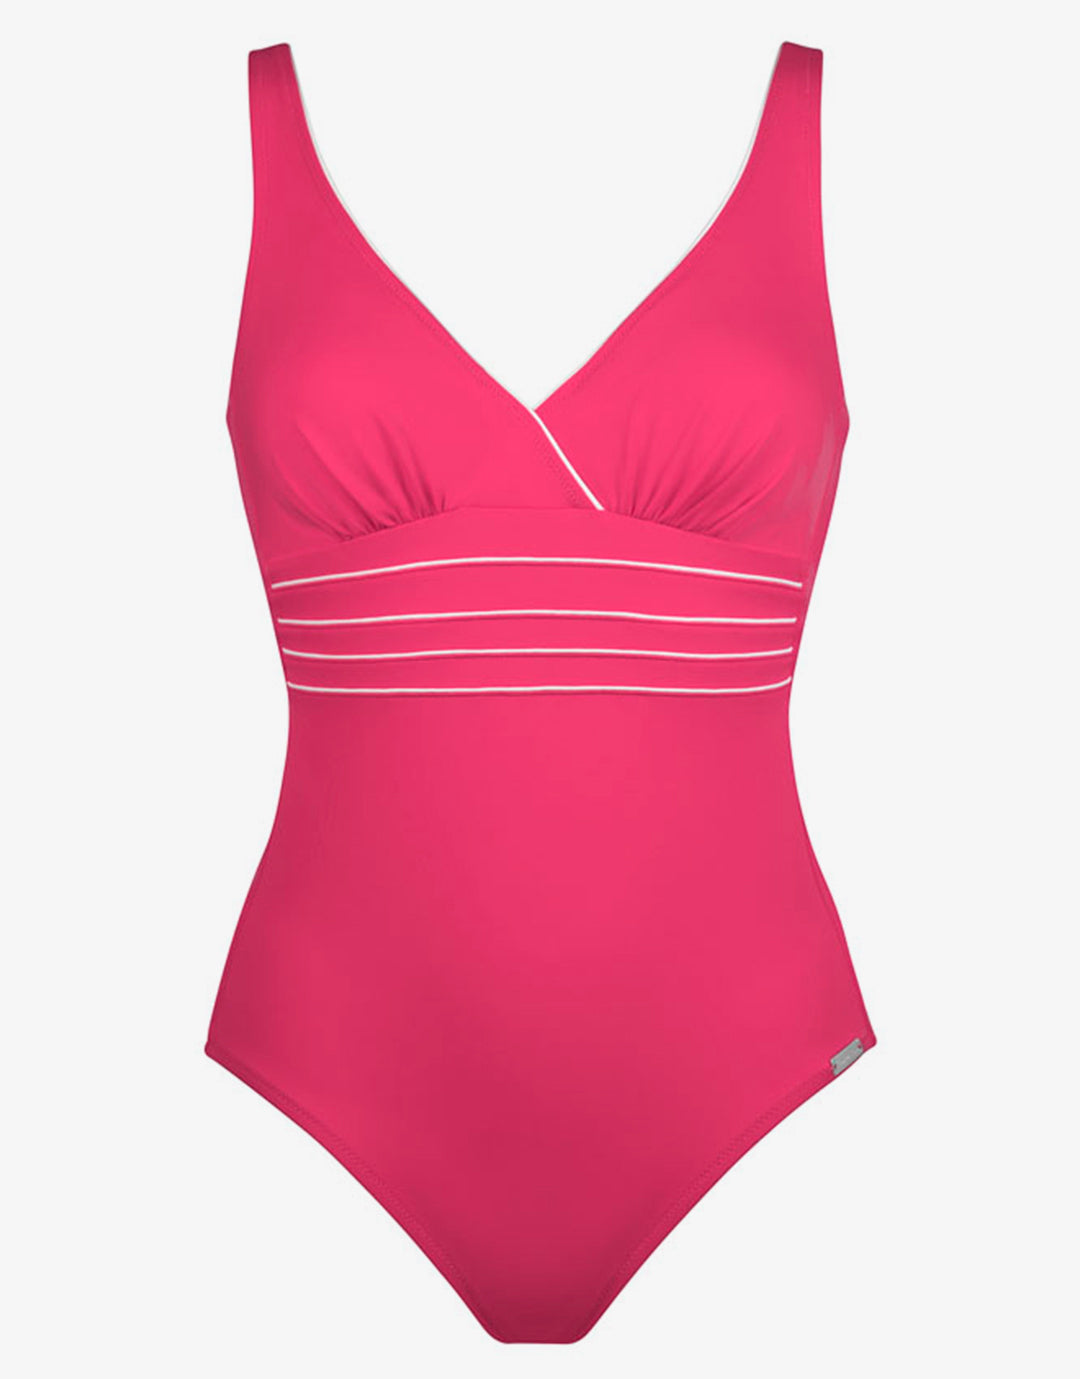 Pure Lines Swimsuit - Pink White - Simply Beach UK